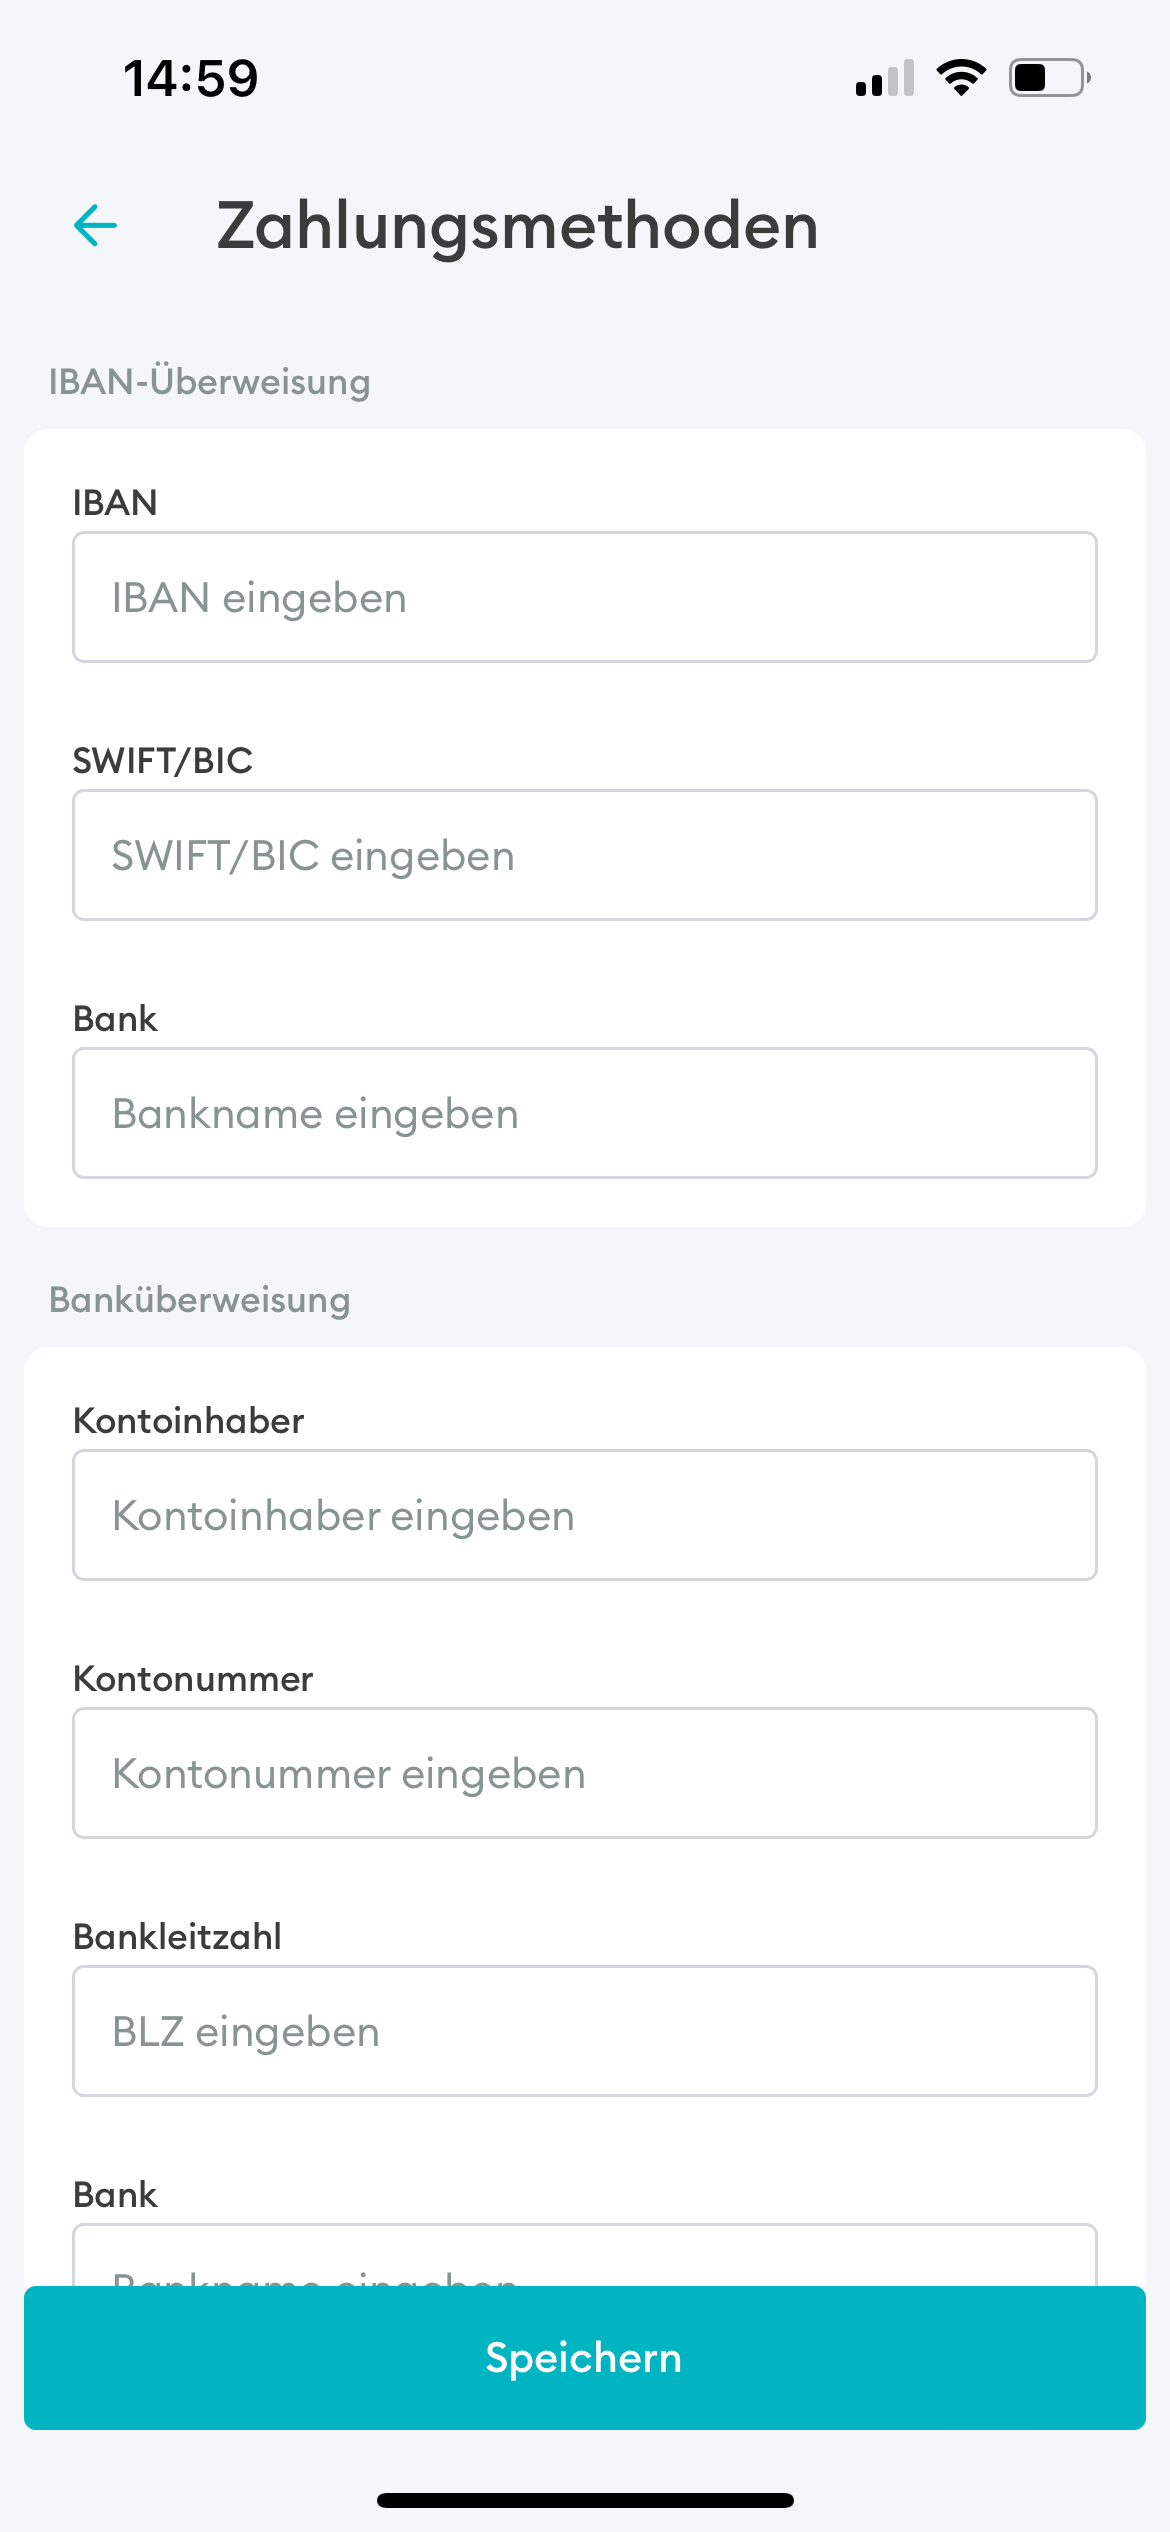 Zahlungsmethoden App.PNG